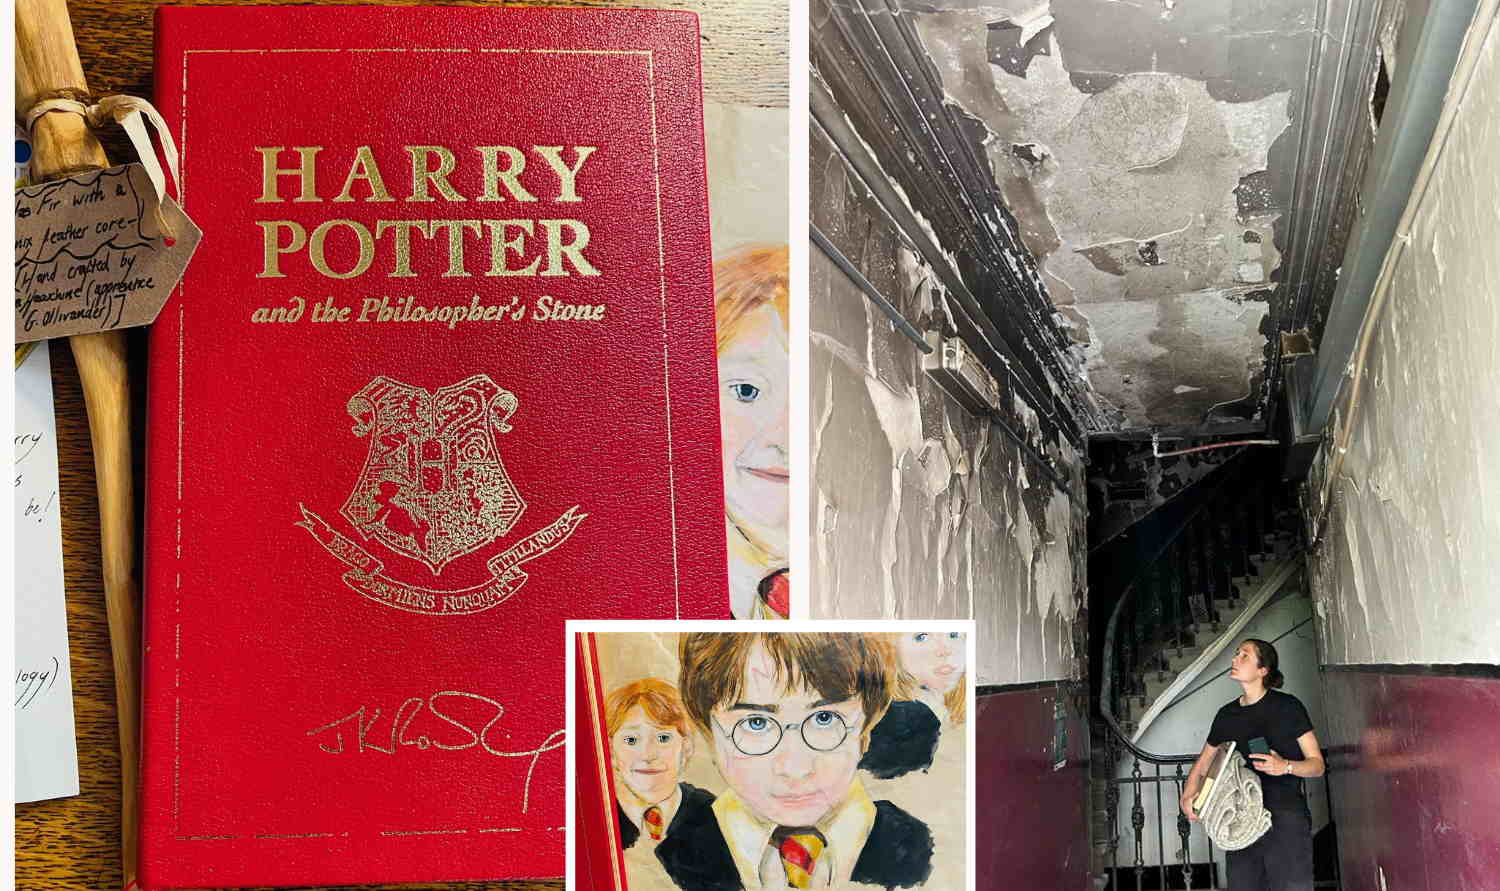 A Unique Harry Potter Edition Survives Fire and Heads to Auction